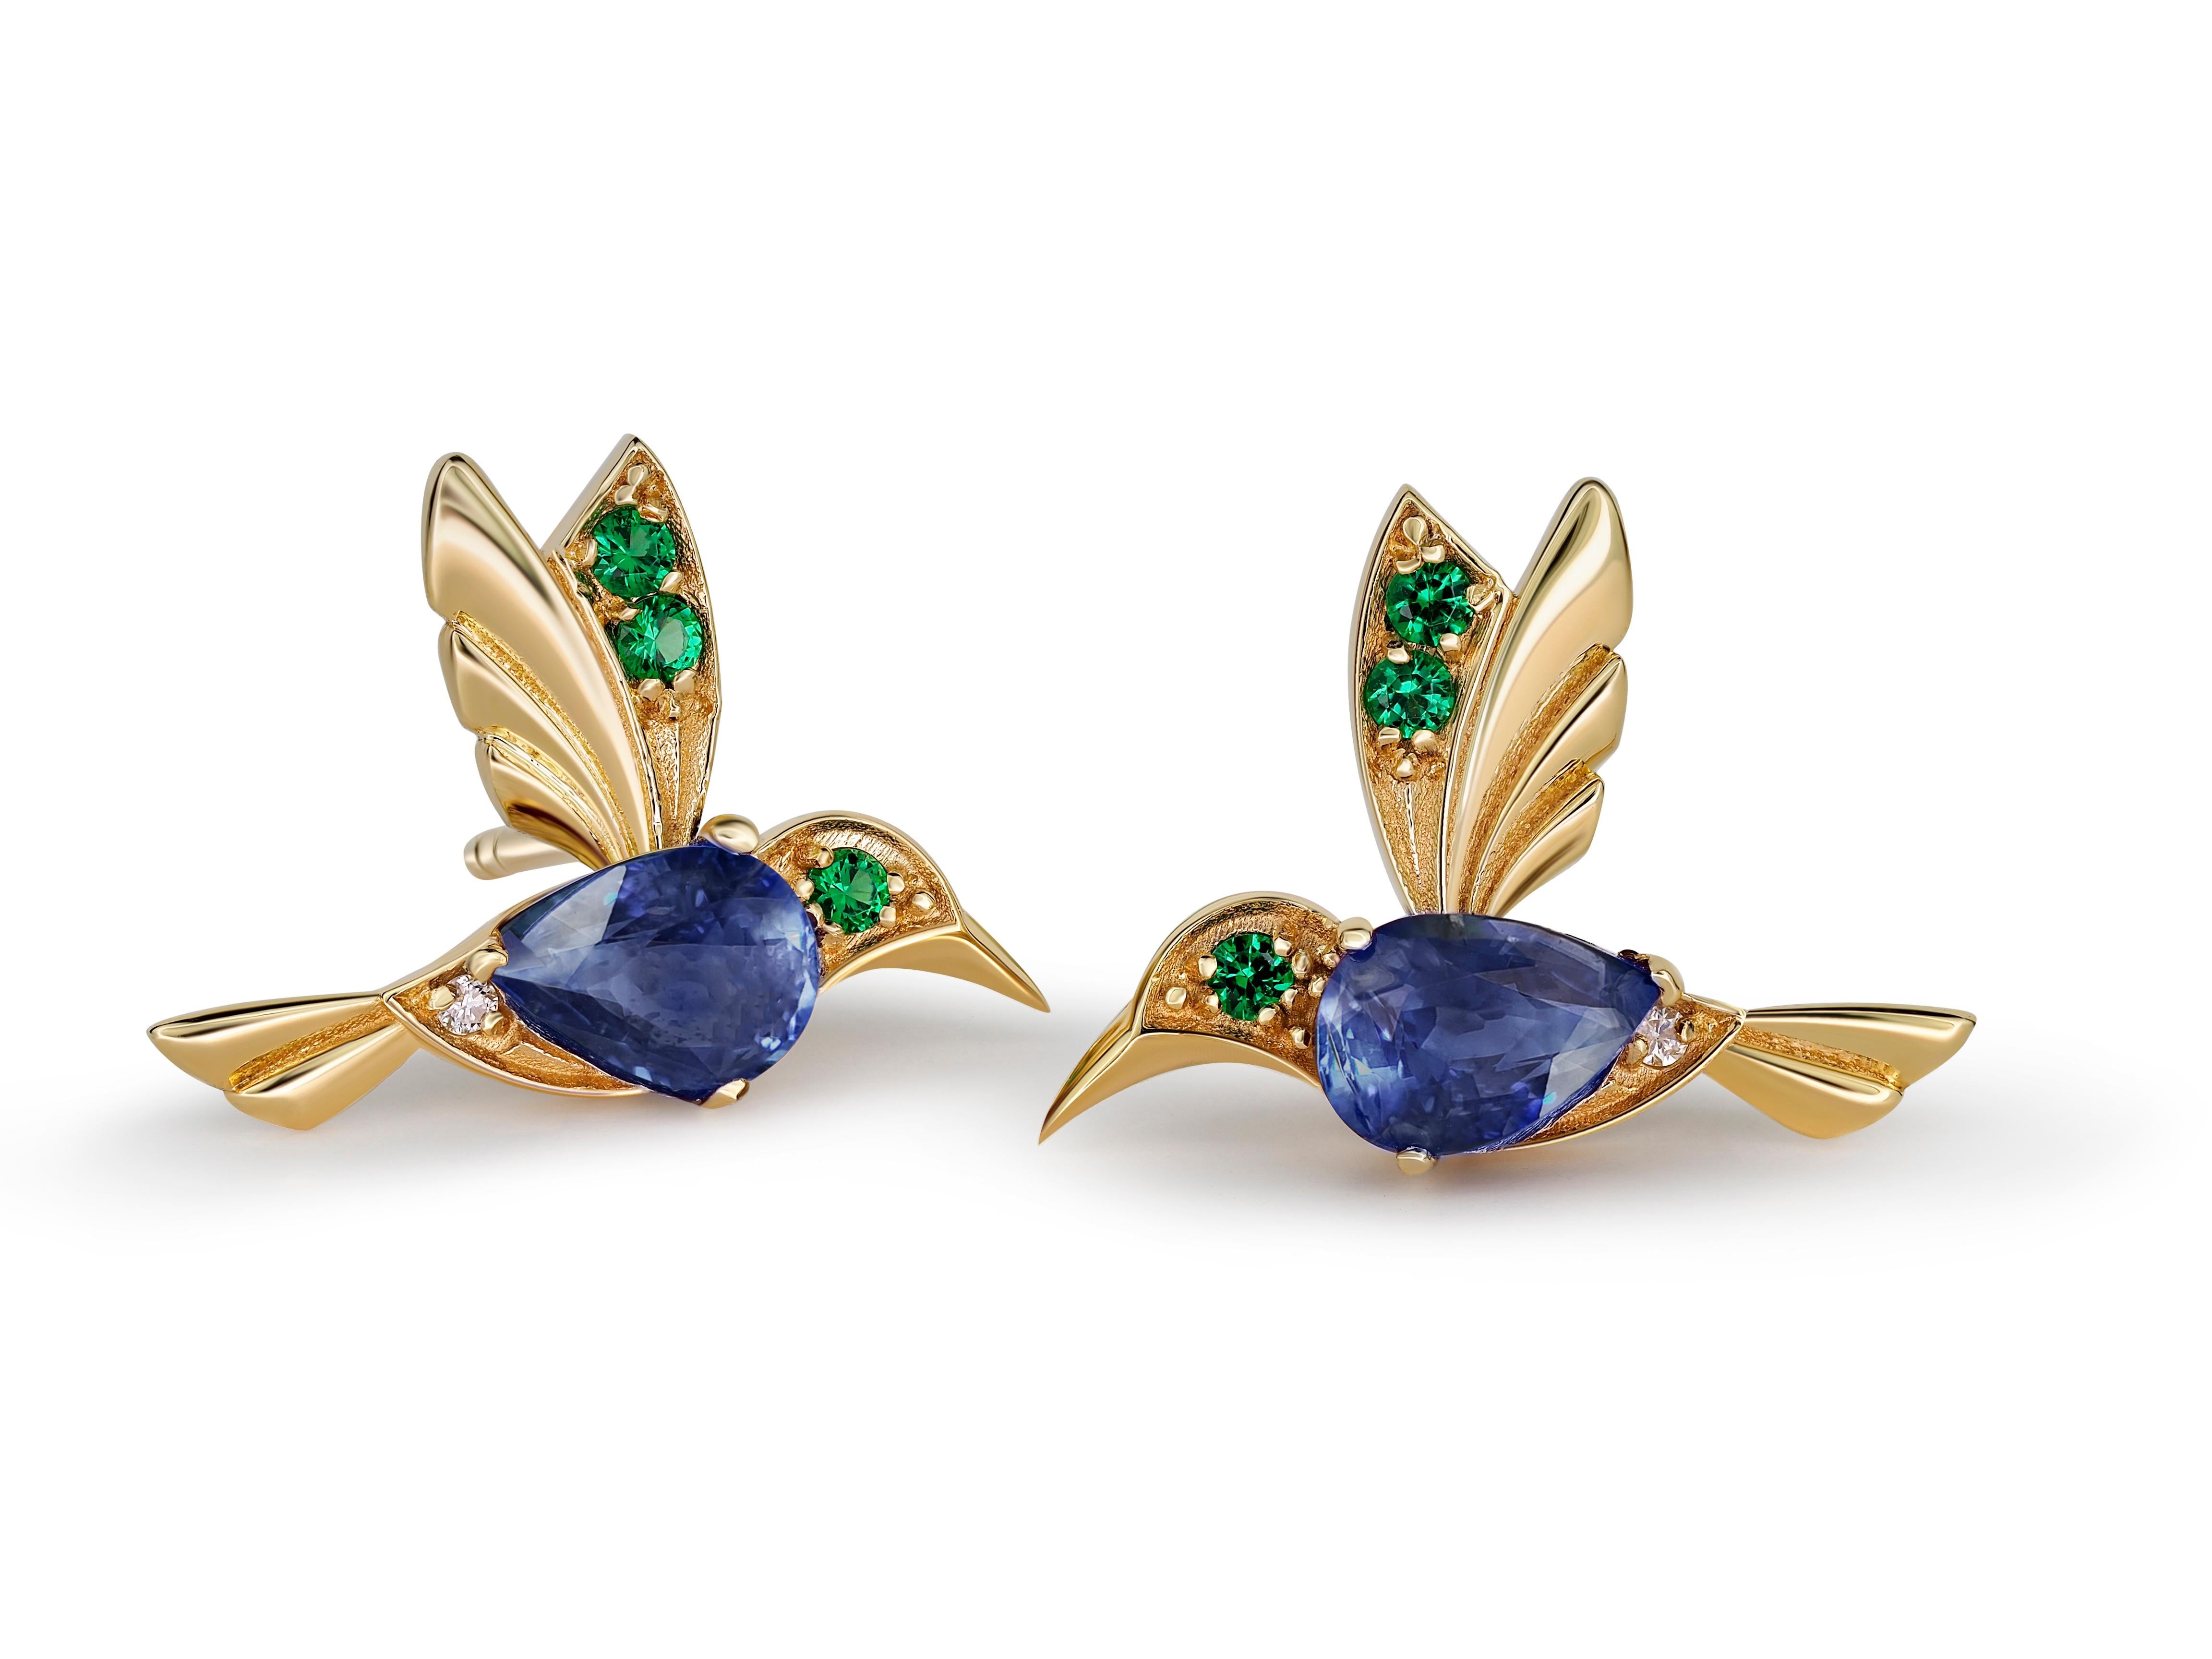 14k Gold Hummingbird Earings Studs with Sapphires. 
Sapphire Bird Stud Earrings. Bird Stud Earrings with gems. Pear sapphire earrings.

Metal: 14 karat gold
Weight: 1.95 g.
Size: 11.73 x 15.85 mm.

Central stones: Genuine sapphires
Cut: 